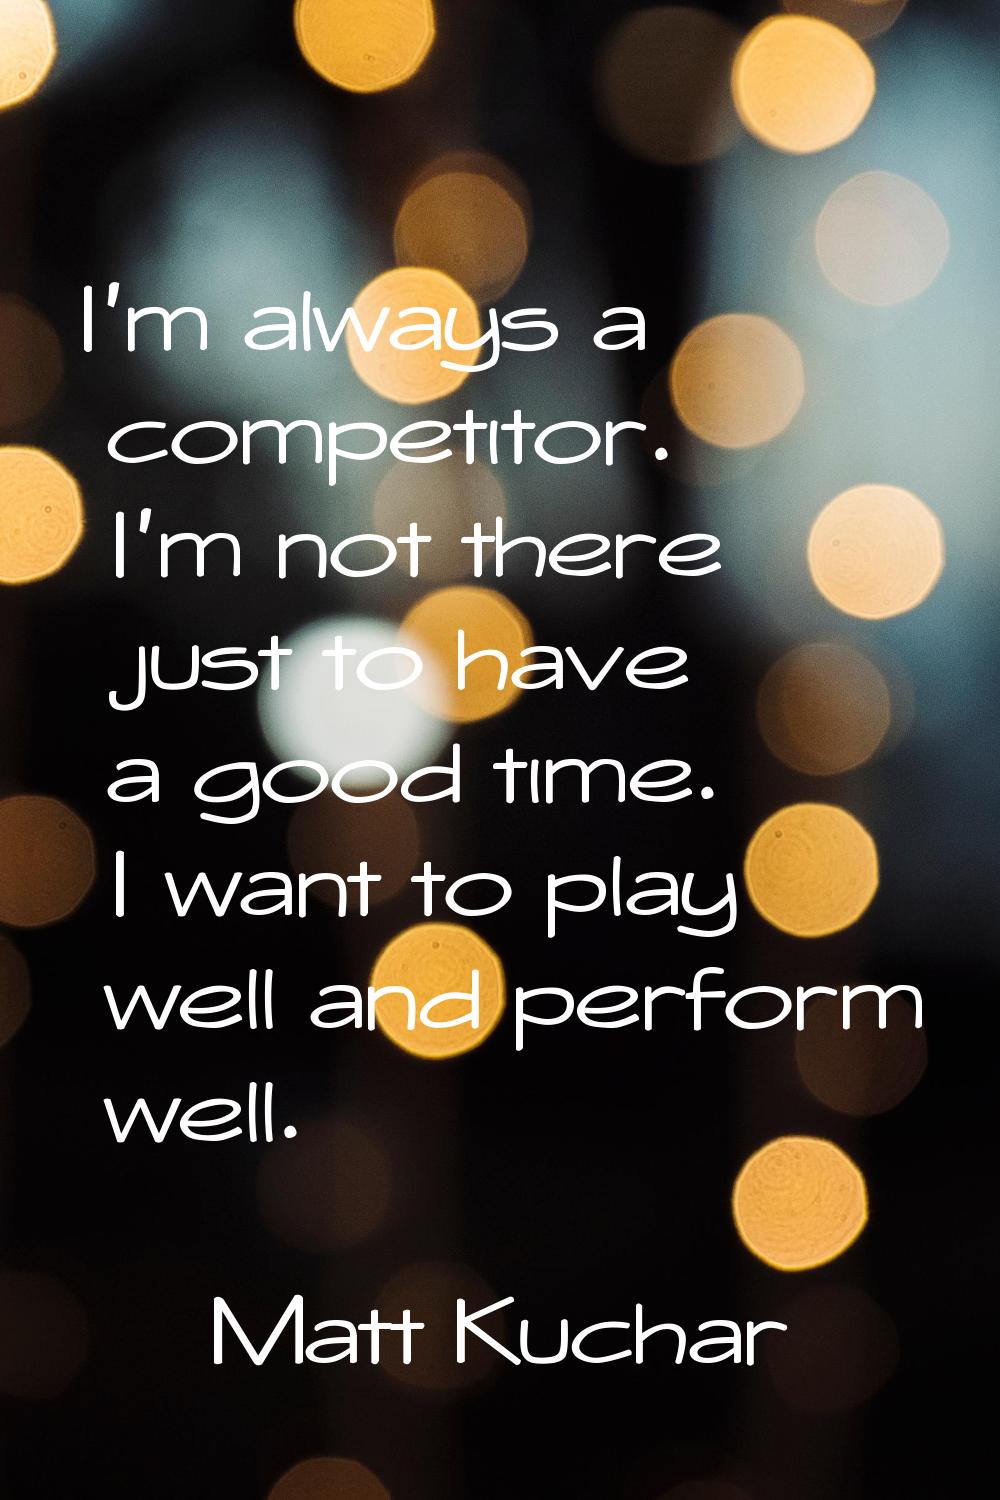 I'm always a competitor. I'm not there just to have a good time. I want to play well and perform we